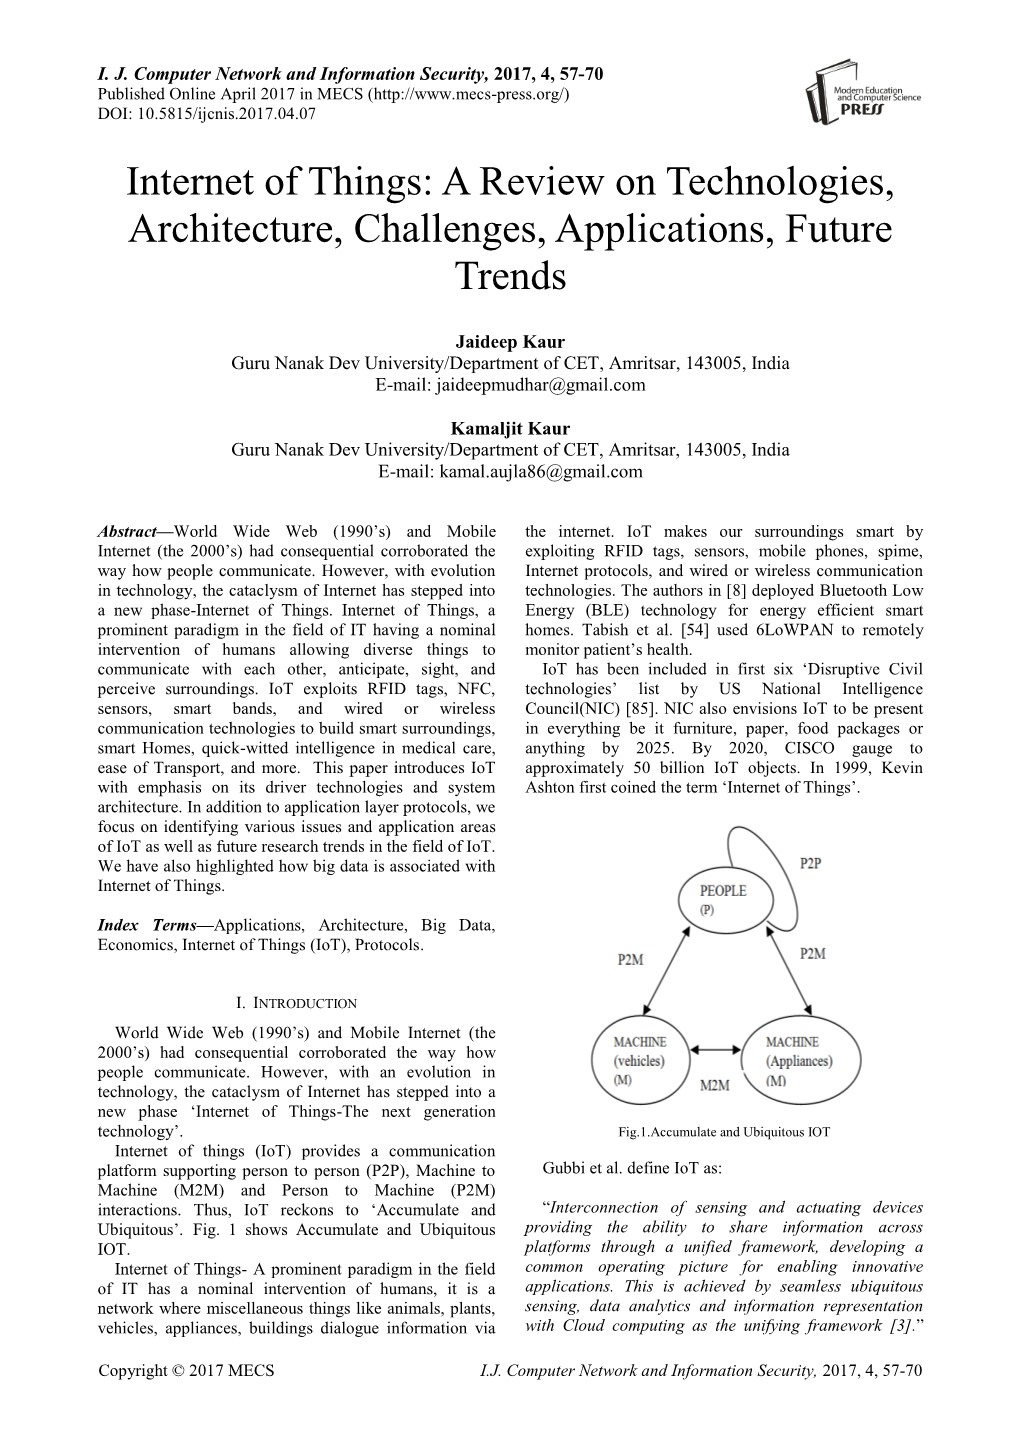 Internet of Things: a Review on Technologies, Architecture, Challenges, Applications, Future Trends